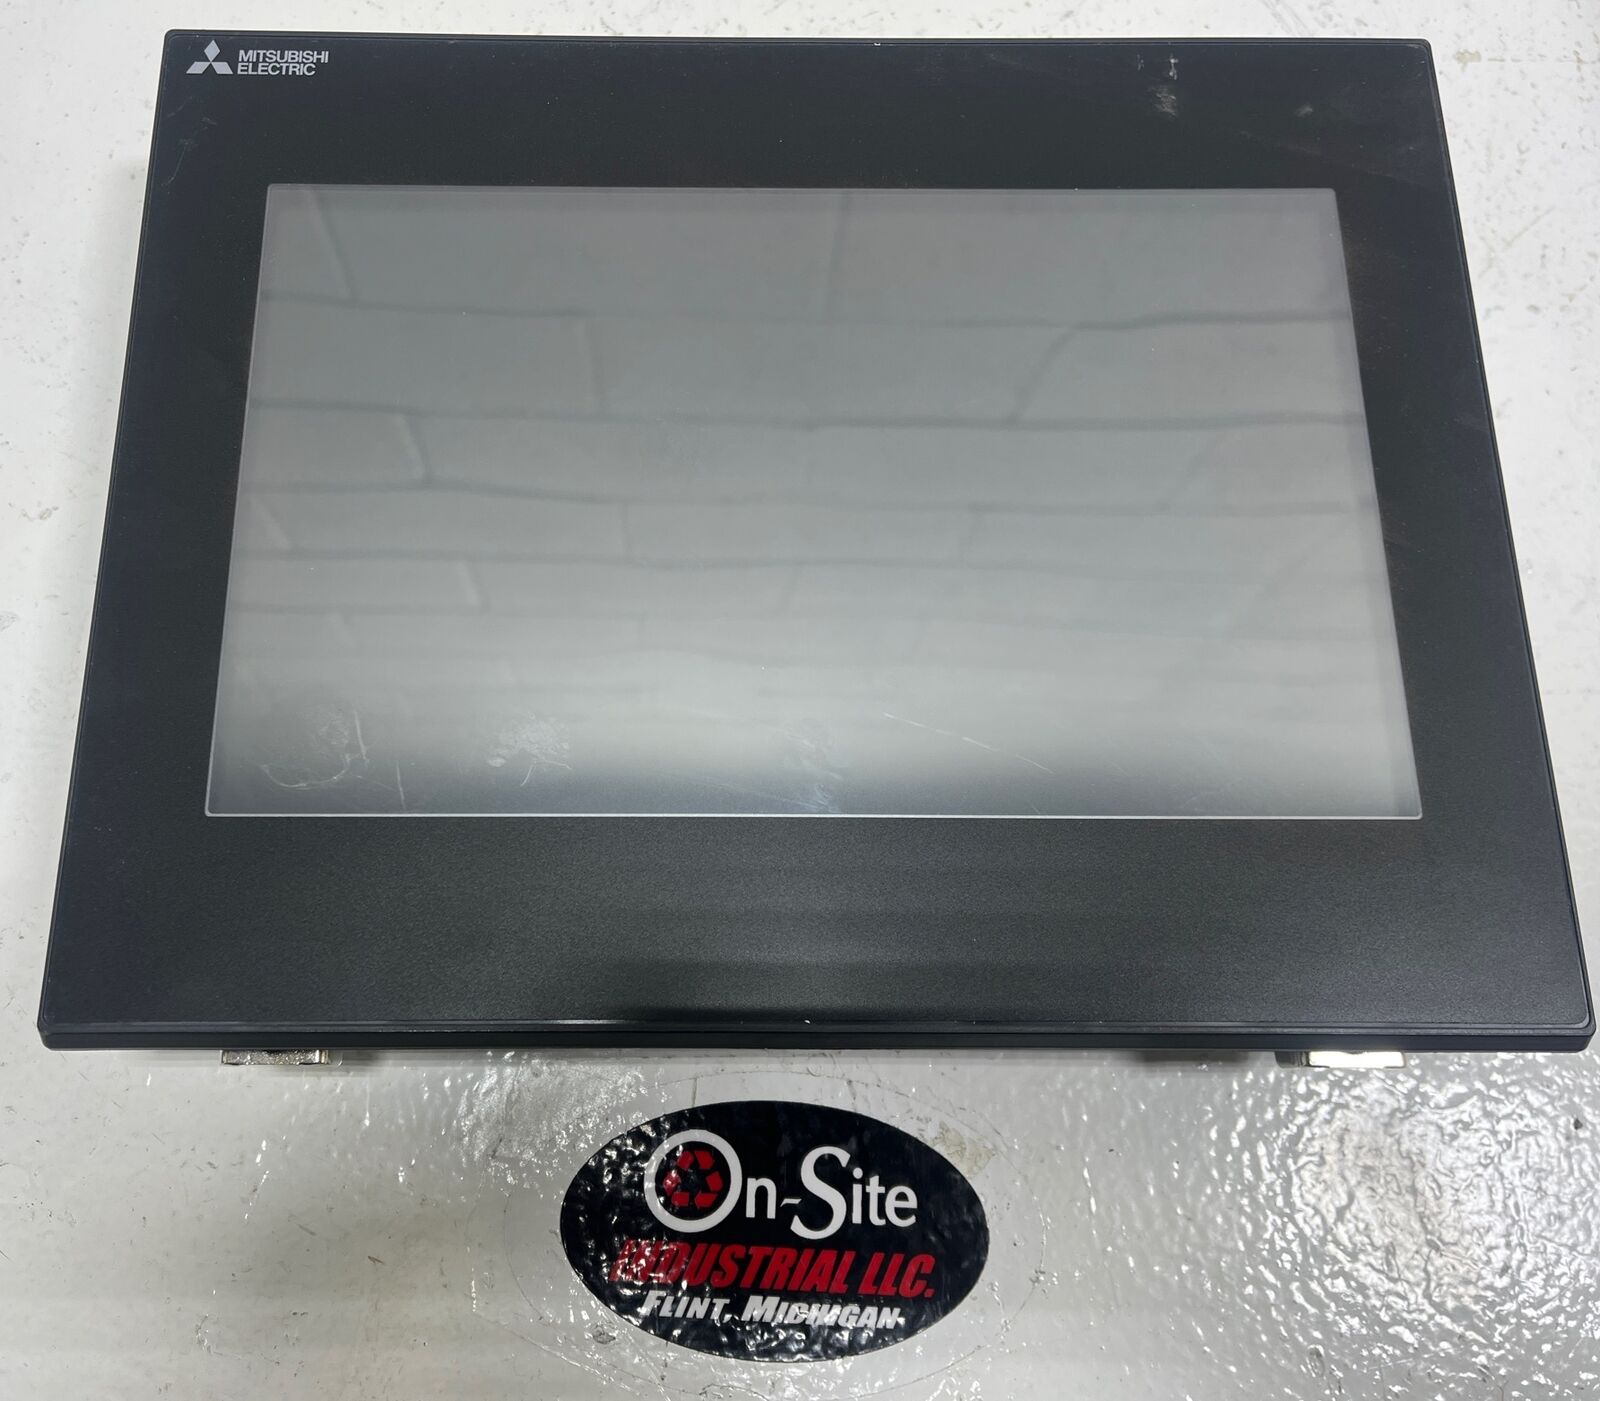 MITSUBISHI ELECTRIC Touch screen 10 inch 7 inch display GS2110-WTBD.